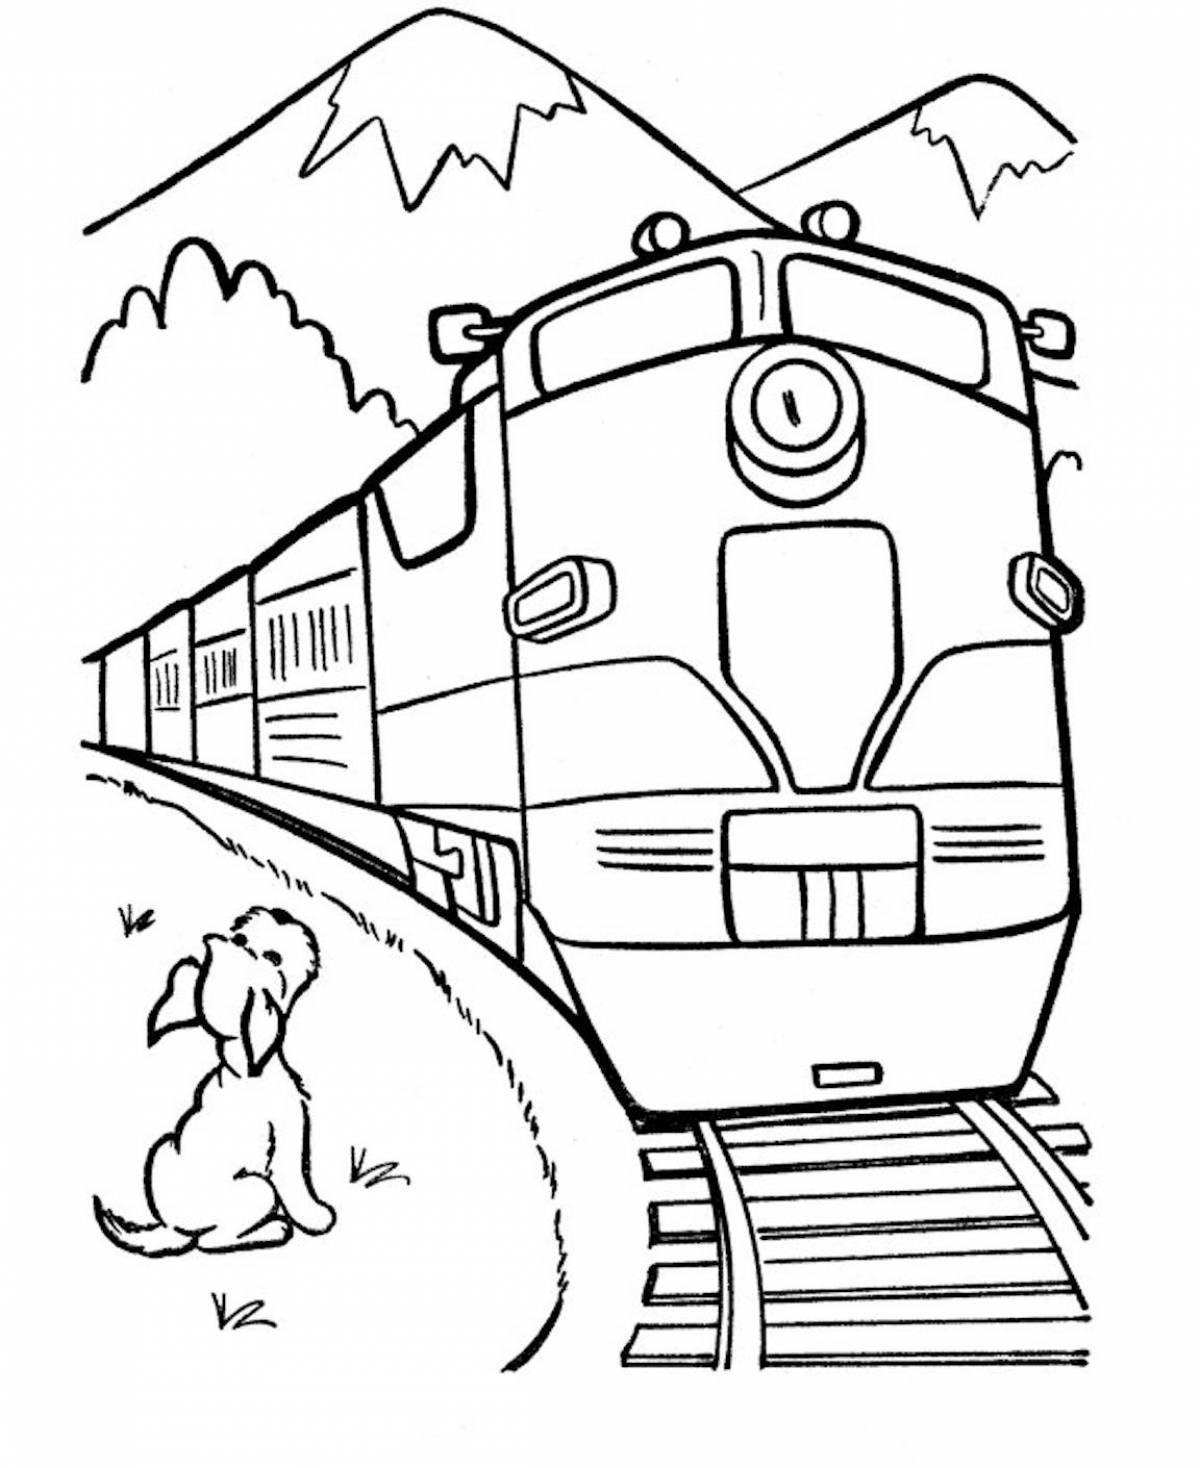 Coloring book colorful train for babies